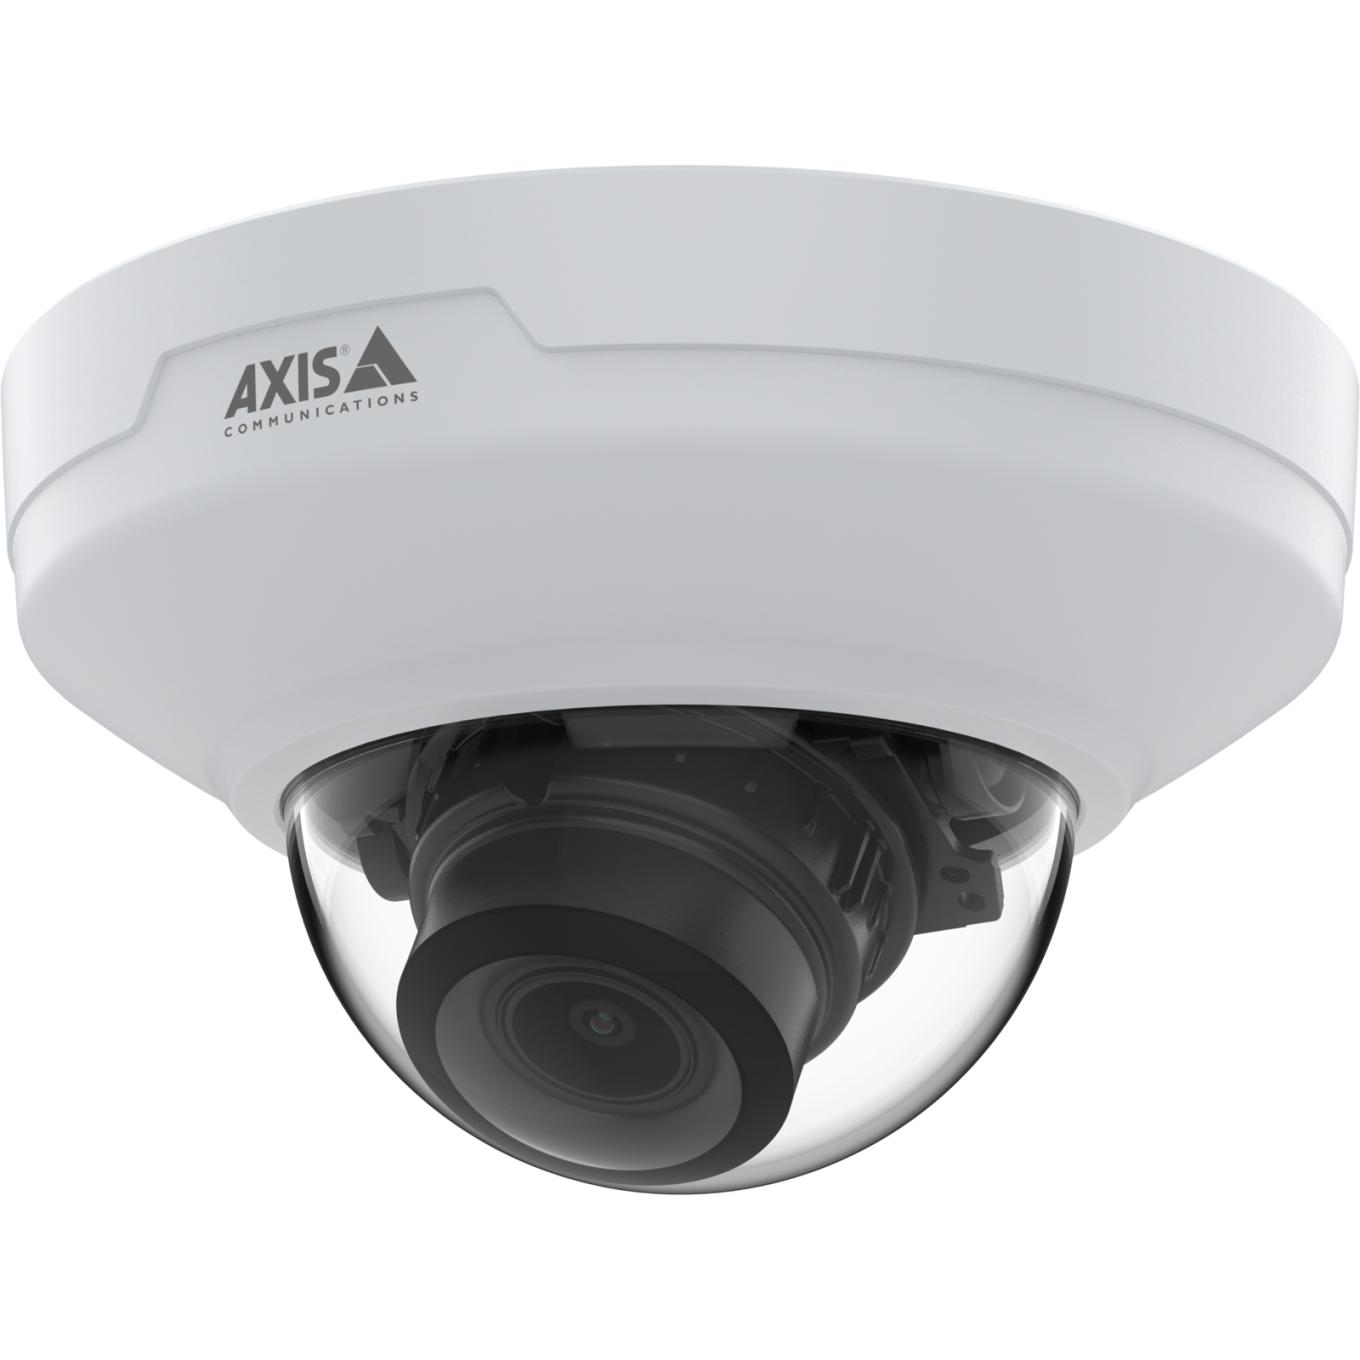 AXIS M4216-V Dome Camera、天井設置、左から見た図